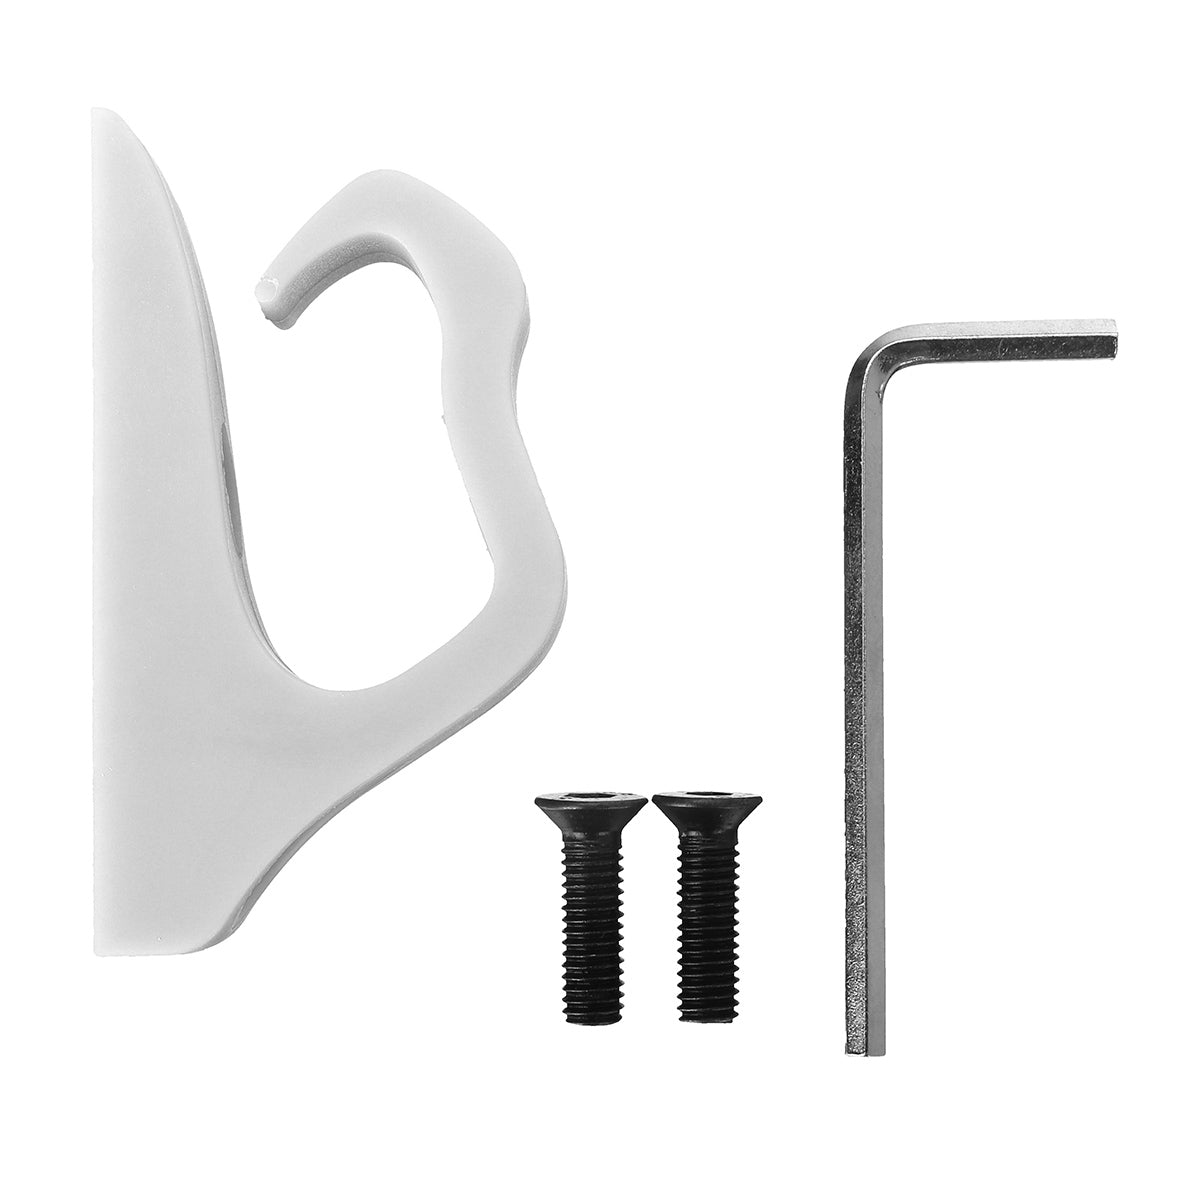 Red/White Scooter Accessories Hook For M365/M187 - Auto GoShop